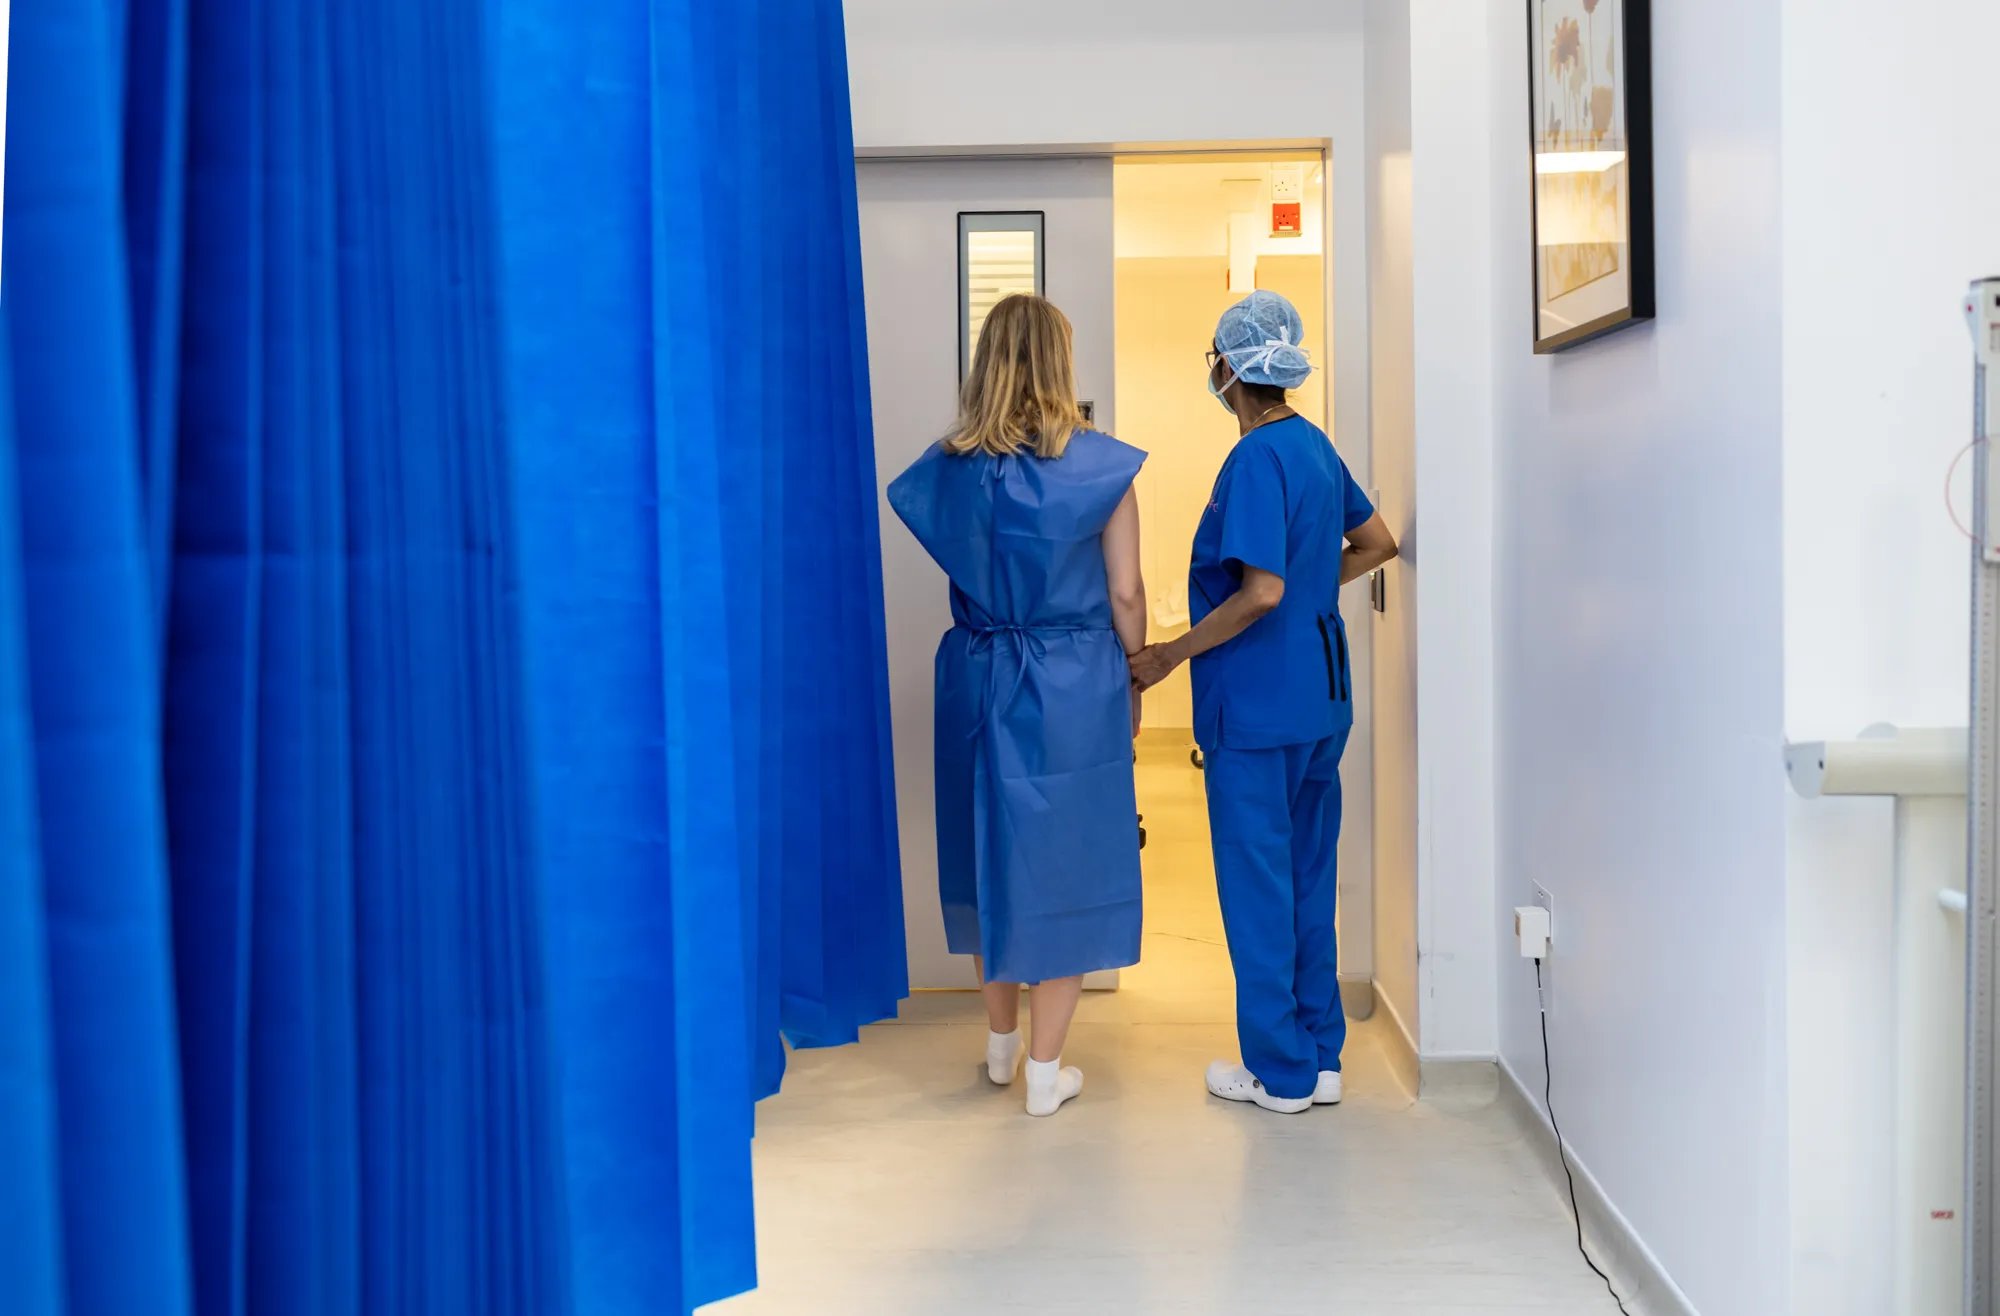 Patient wearing scrubs and a fertility doctor walking towards the door, theatre curtain taking the left side of the picture.